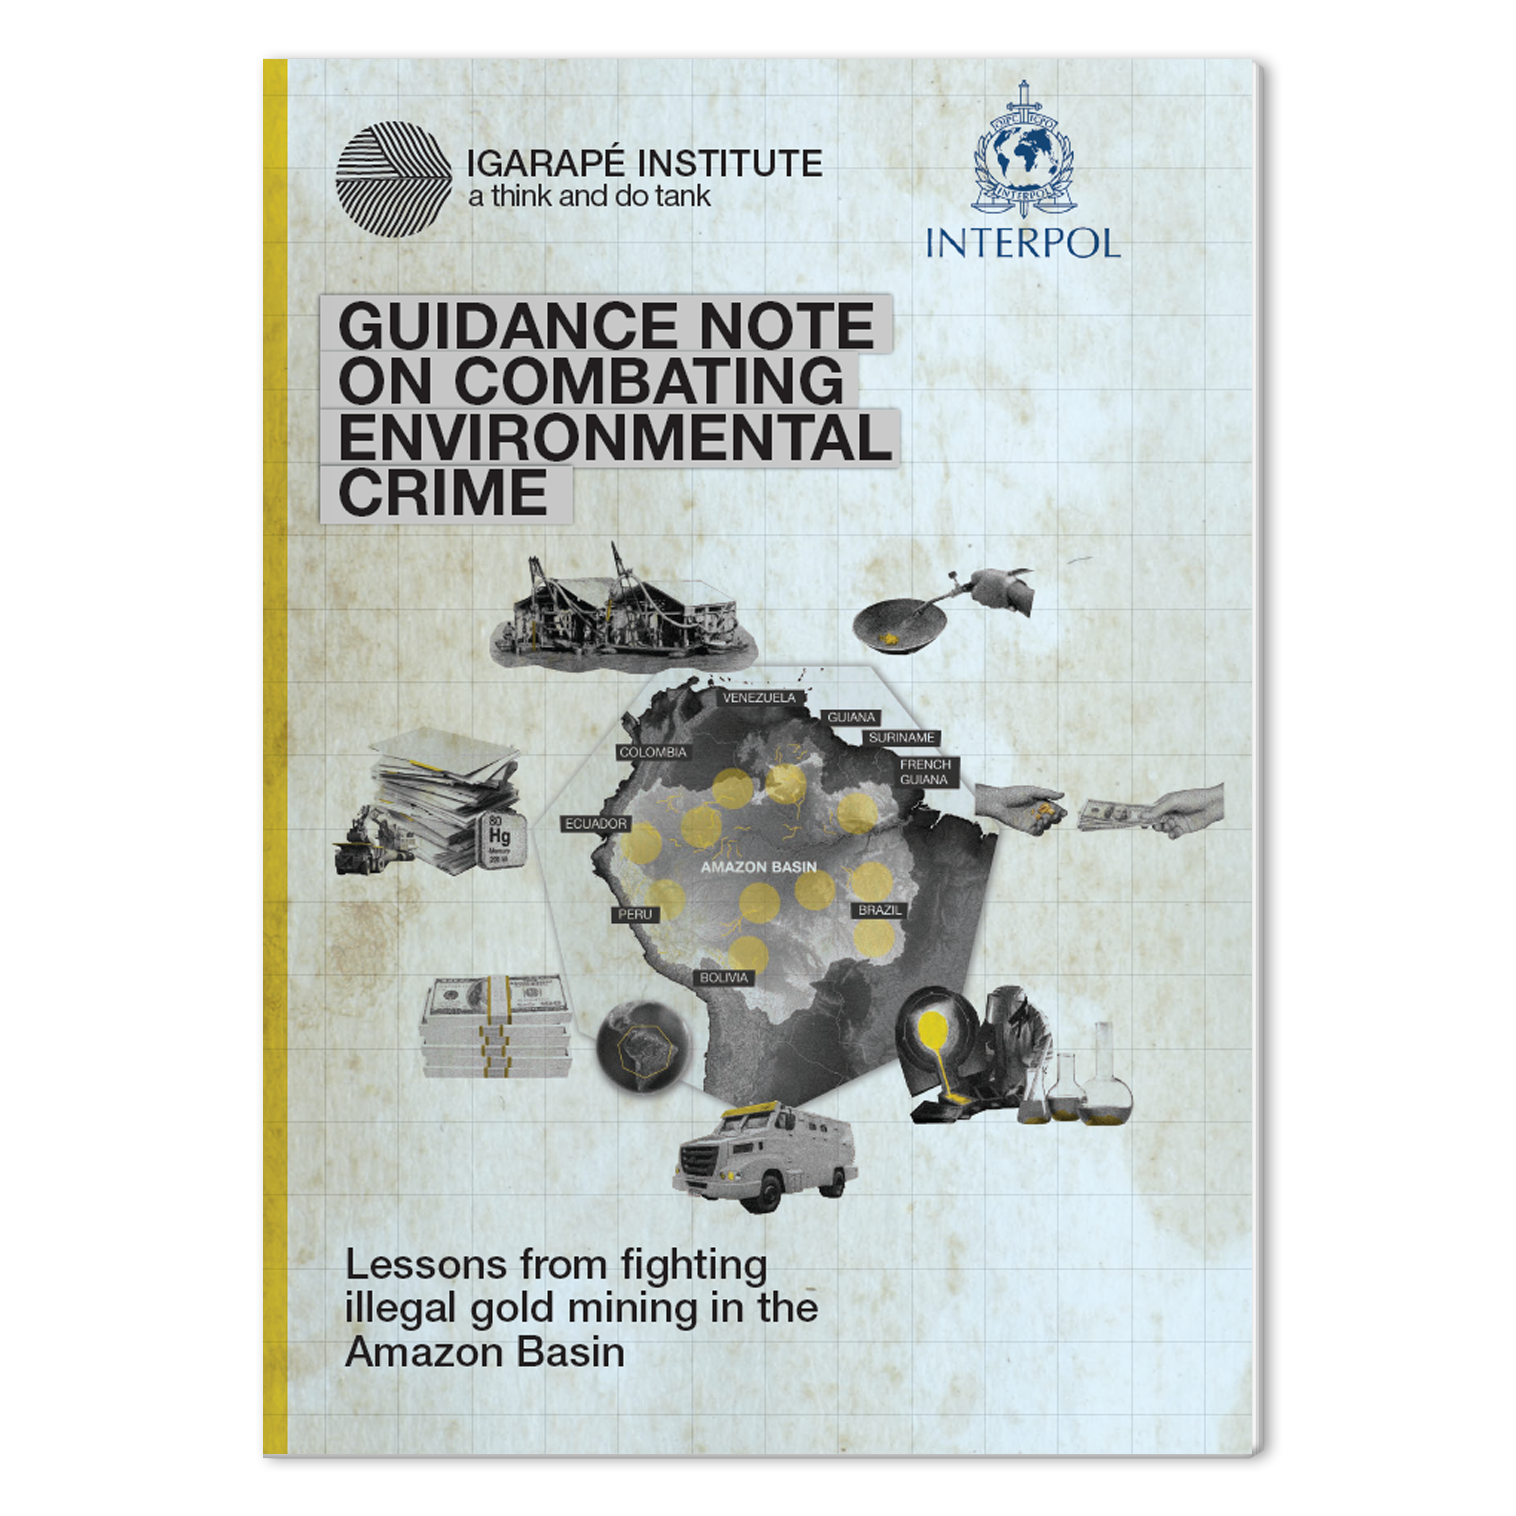 Guidance note on combating environmental crime